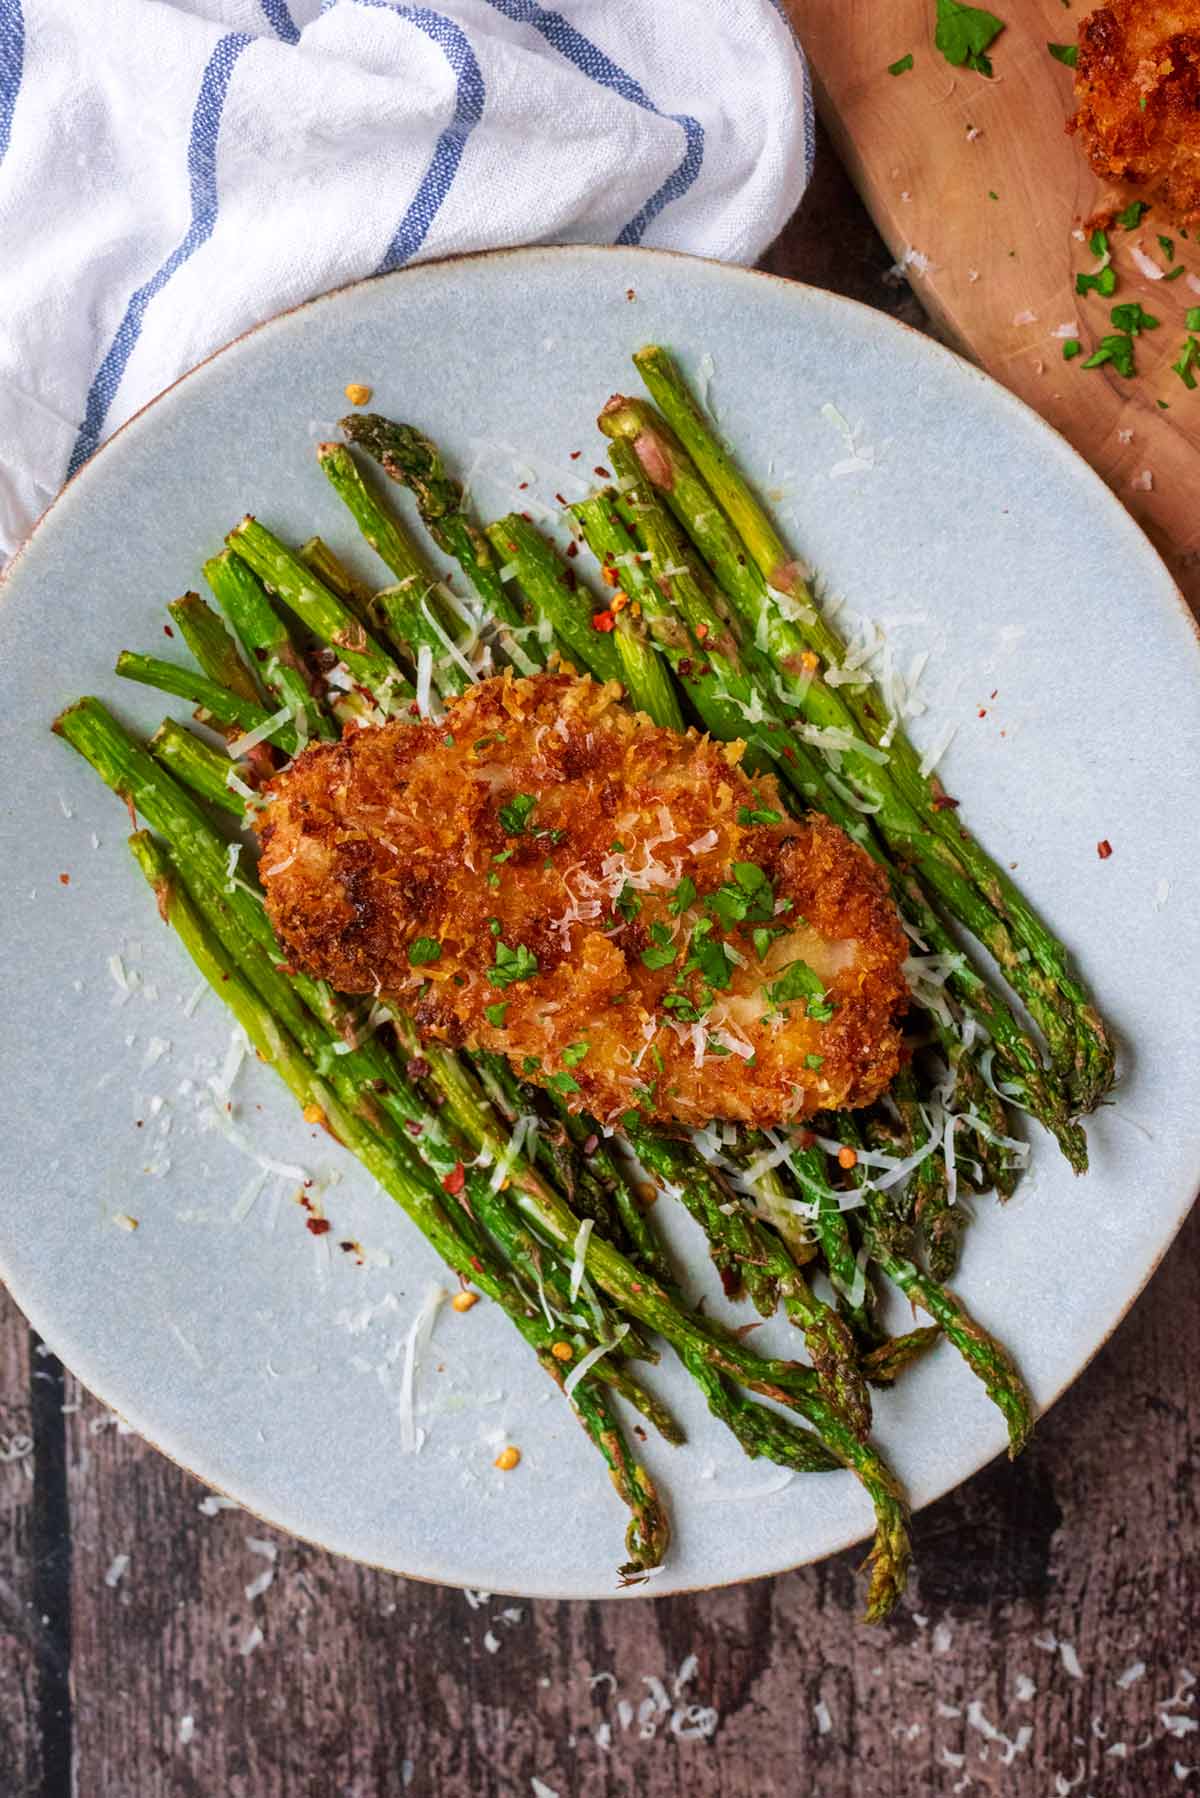 A plate of cooked asparagus with a breaded chicken breast on top of them.